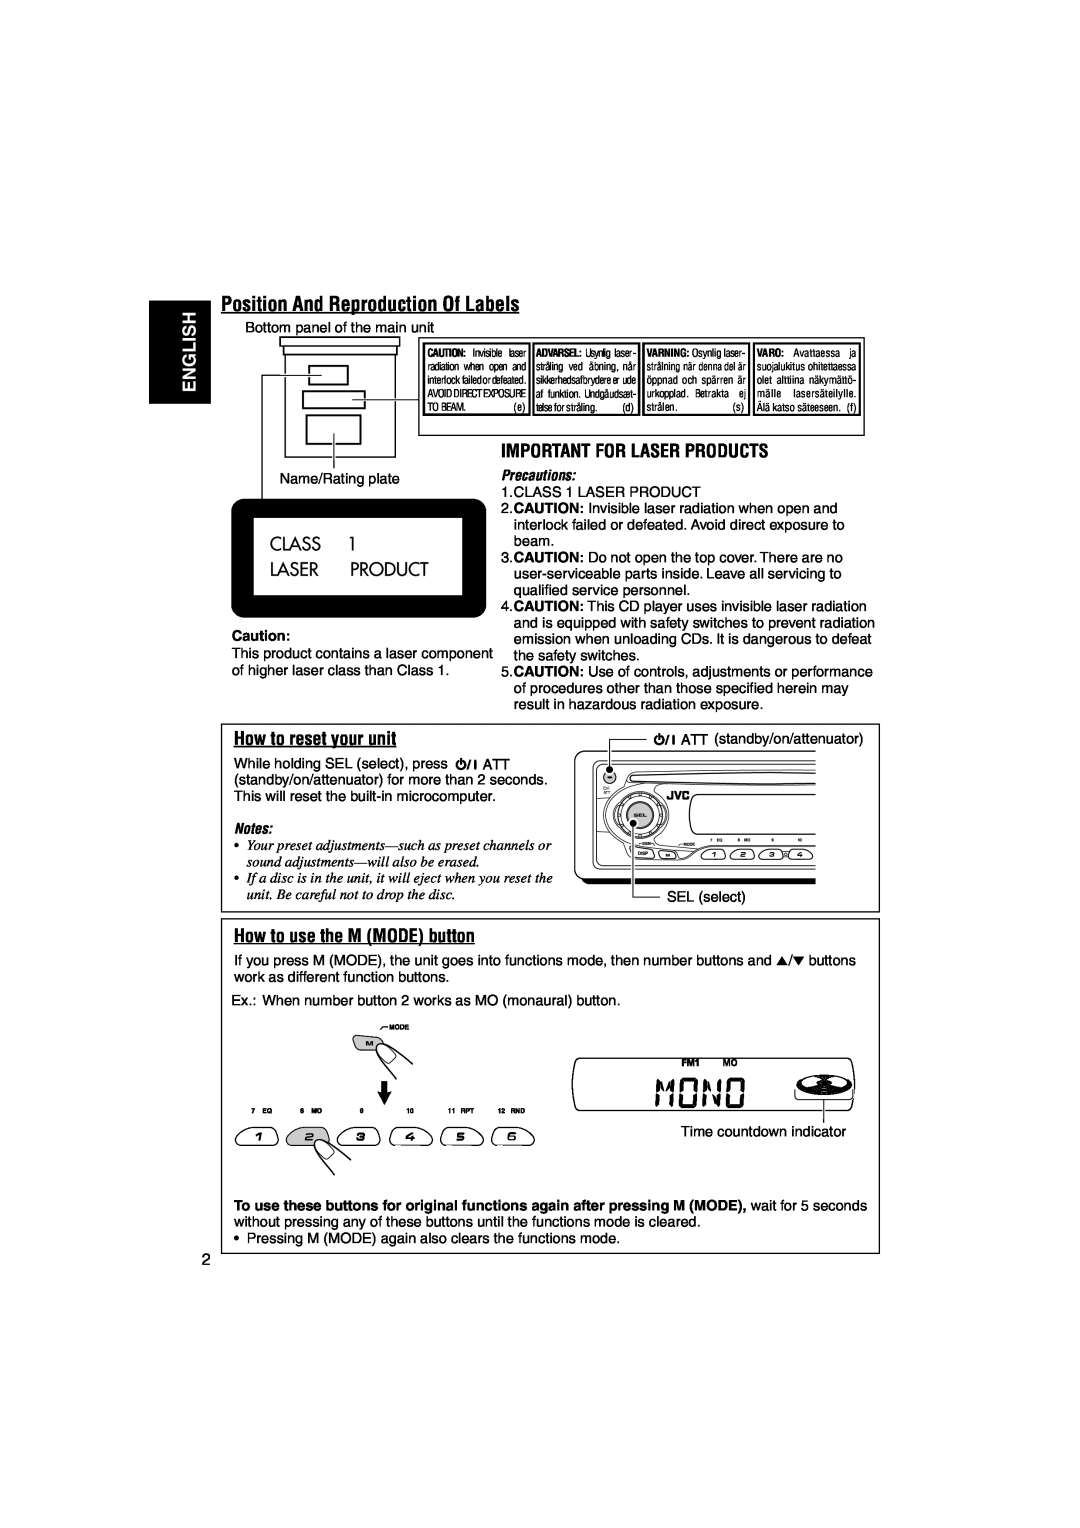 JVC KD-S891R manual Position And Reproduction Of Labels, English, Important For Laser Products, How to reset your unit 